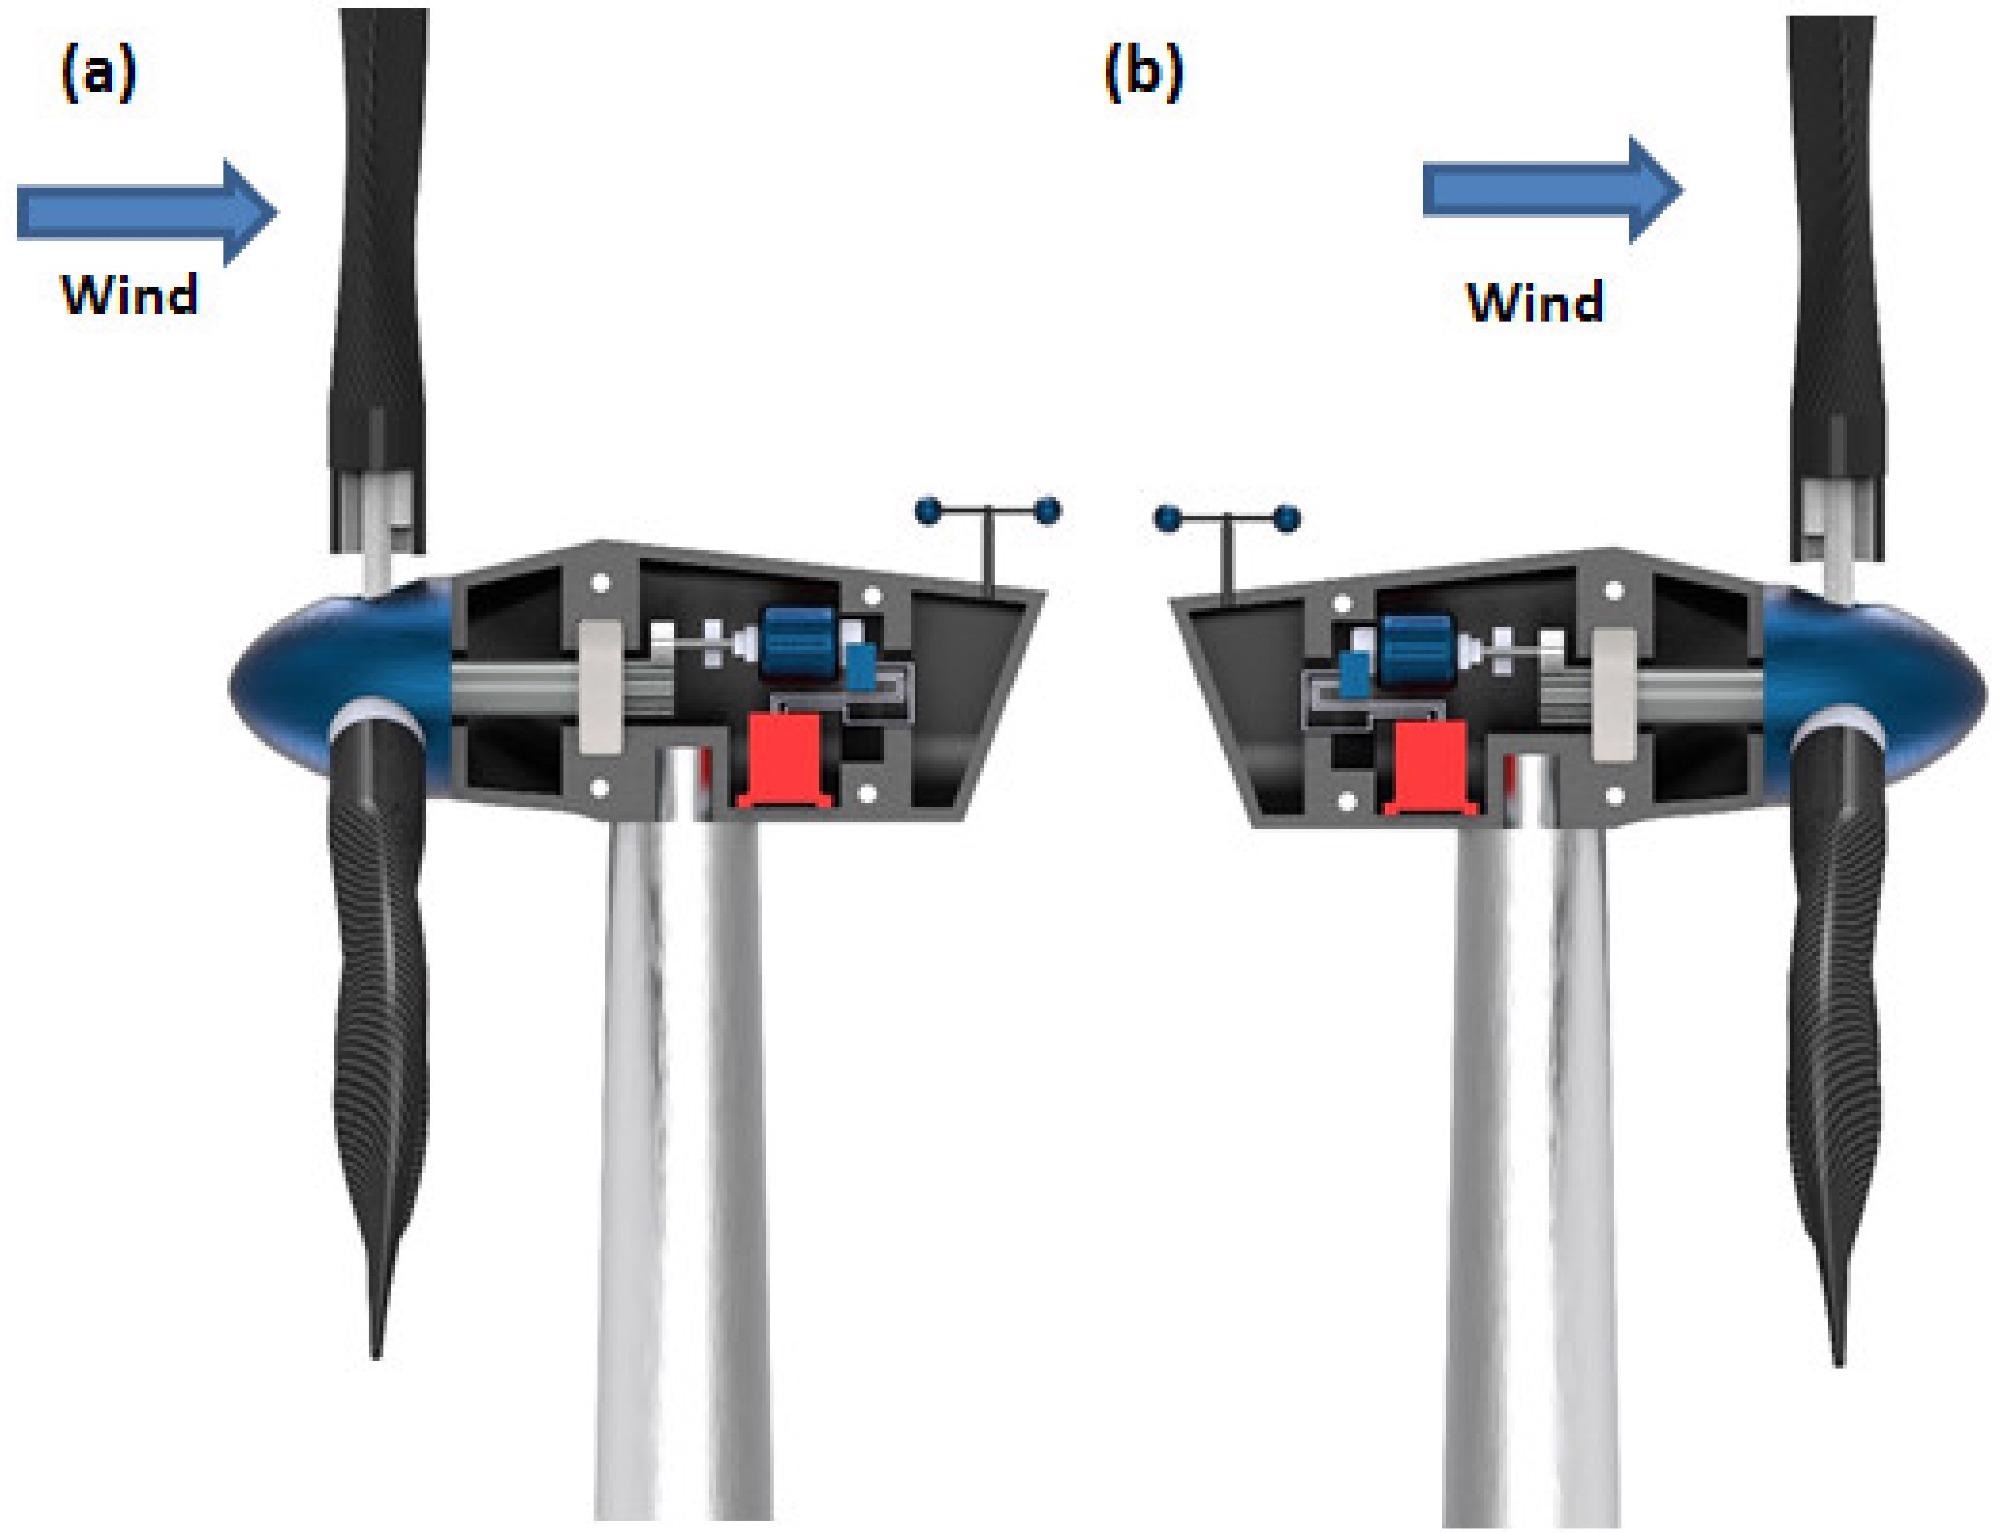 (a) Upwind HAWT (when wind is coming from the front side of the turbine blades); (b) Downwind HAWT (when wind is coming from the back side of the turbine blades).